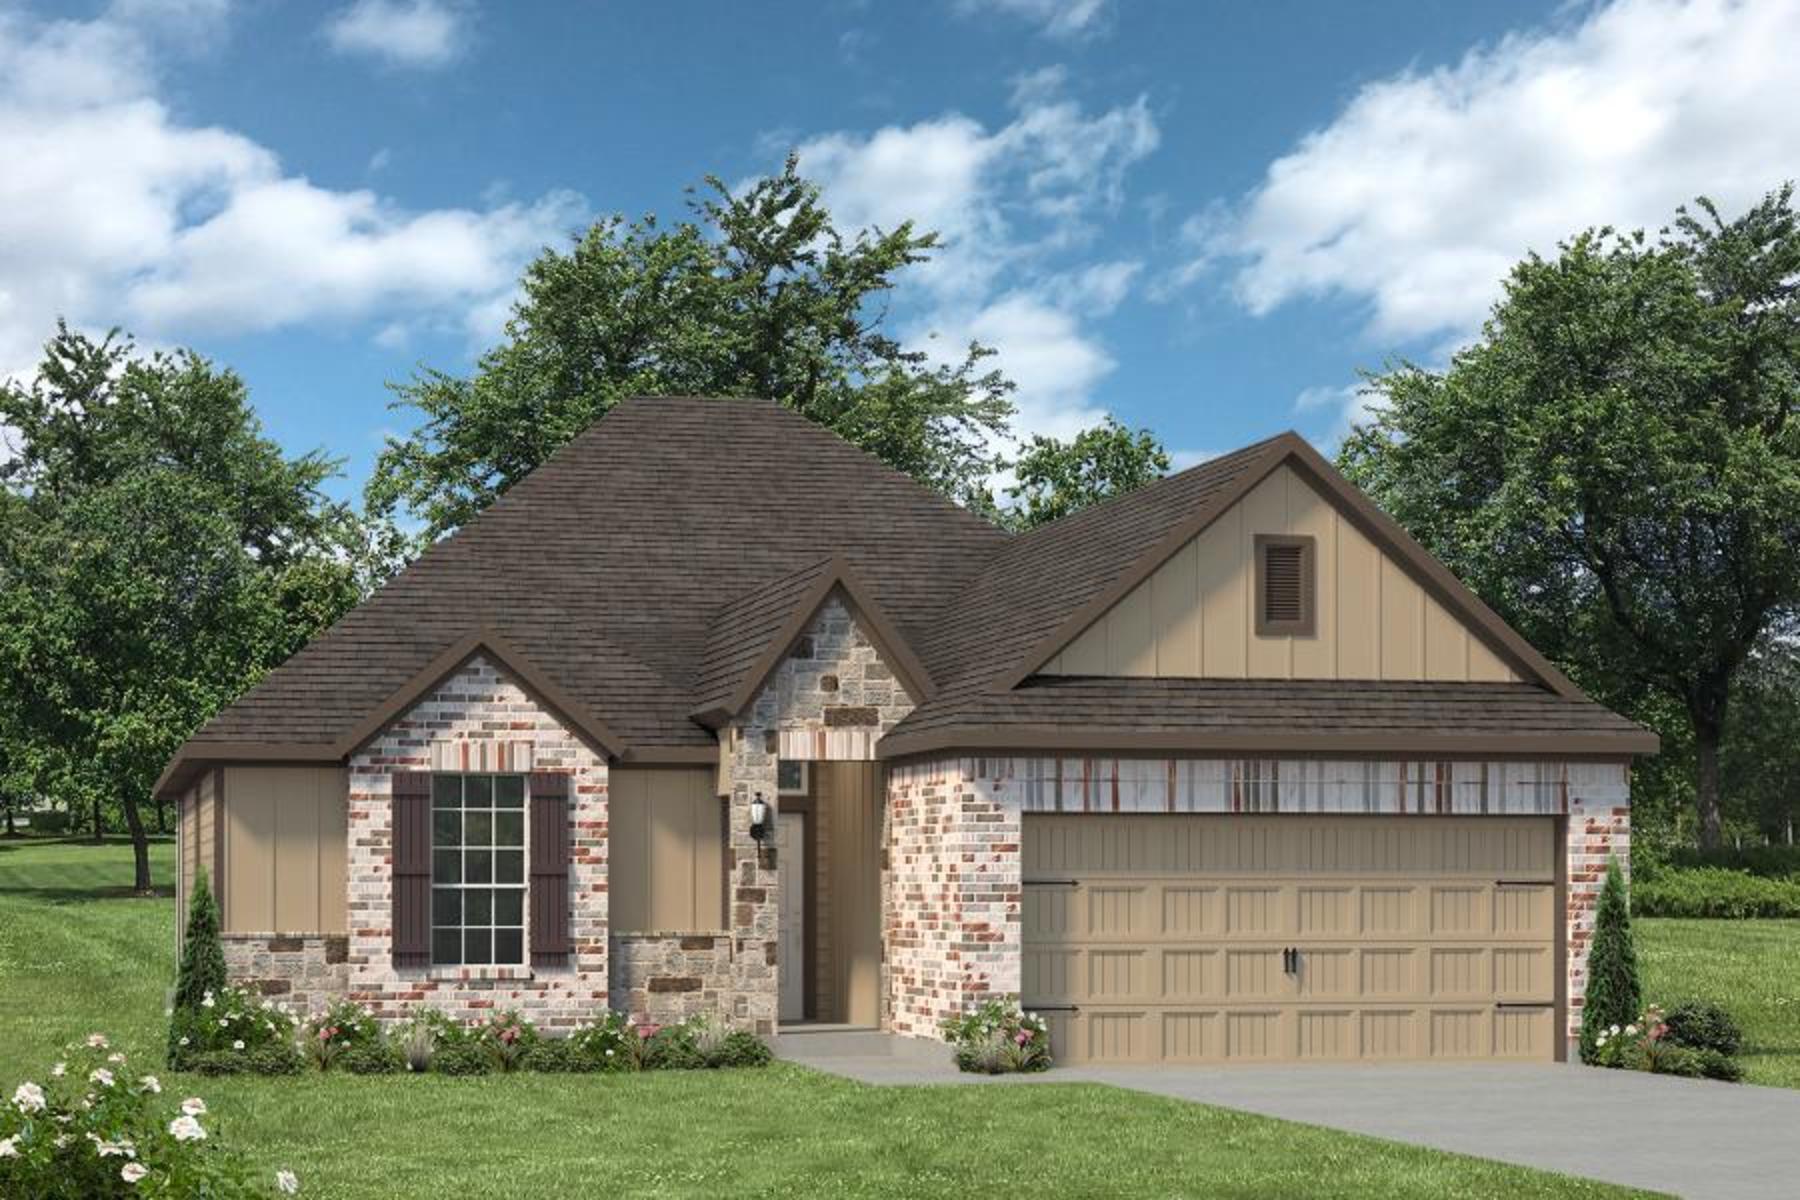 https://myhome.anewgo.com/client/stylecraft/community/Our%20Plans/plan/1651%20%7C%20Denton%20Classic?elevId=26. The 1651 Home with 4 Bedrooms